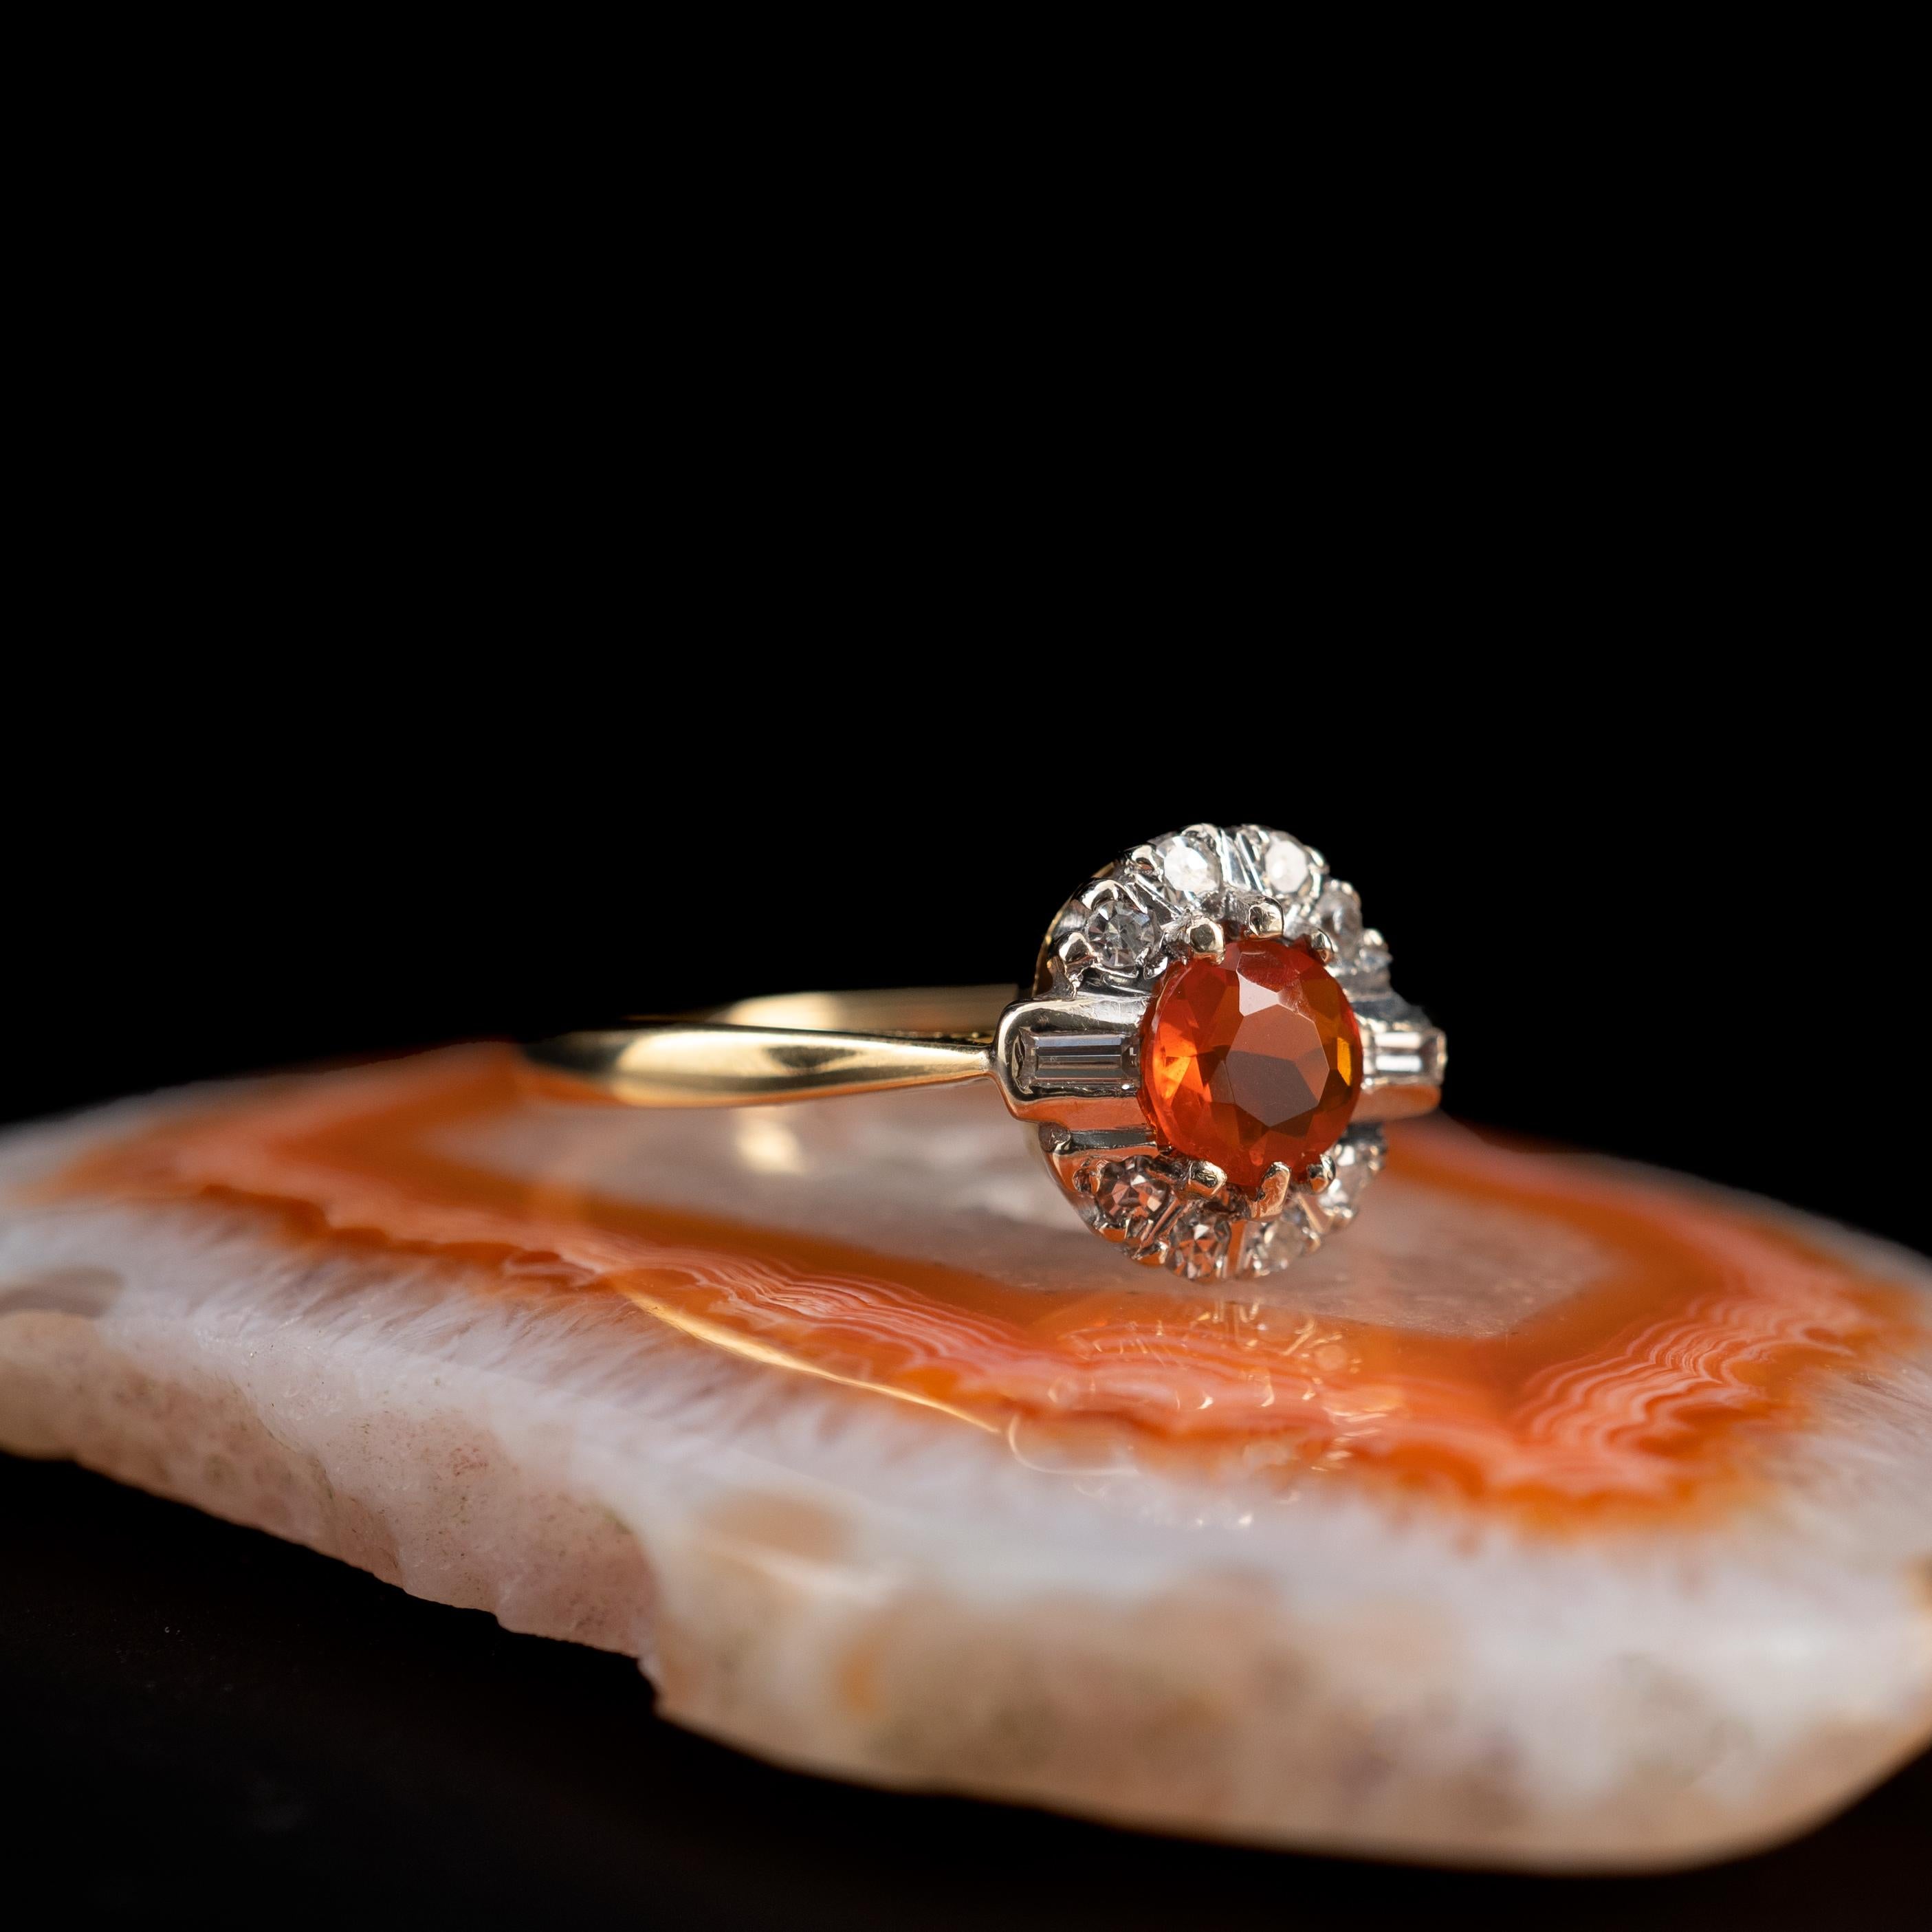 Mexican Fire Opal Diamond Halo Dress Ring 18 Karat Gold - Ring size 7.75

This outstanding ring features a round facet cut stunning fire opal and a halo surround of round-cut and baguette-cut diamonds. The Fire Opal of wonderful colour displaying